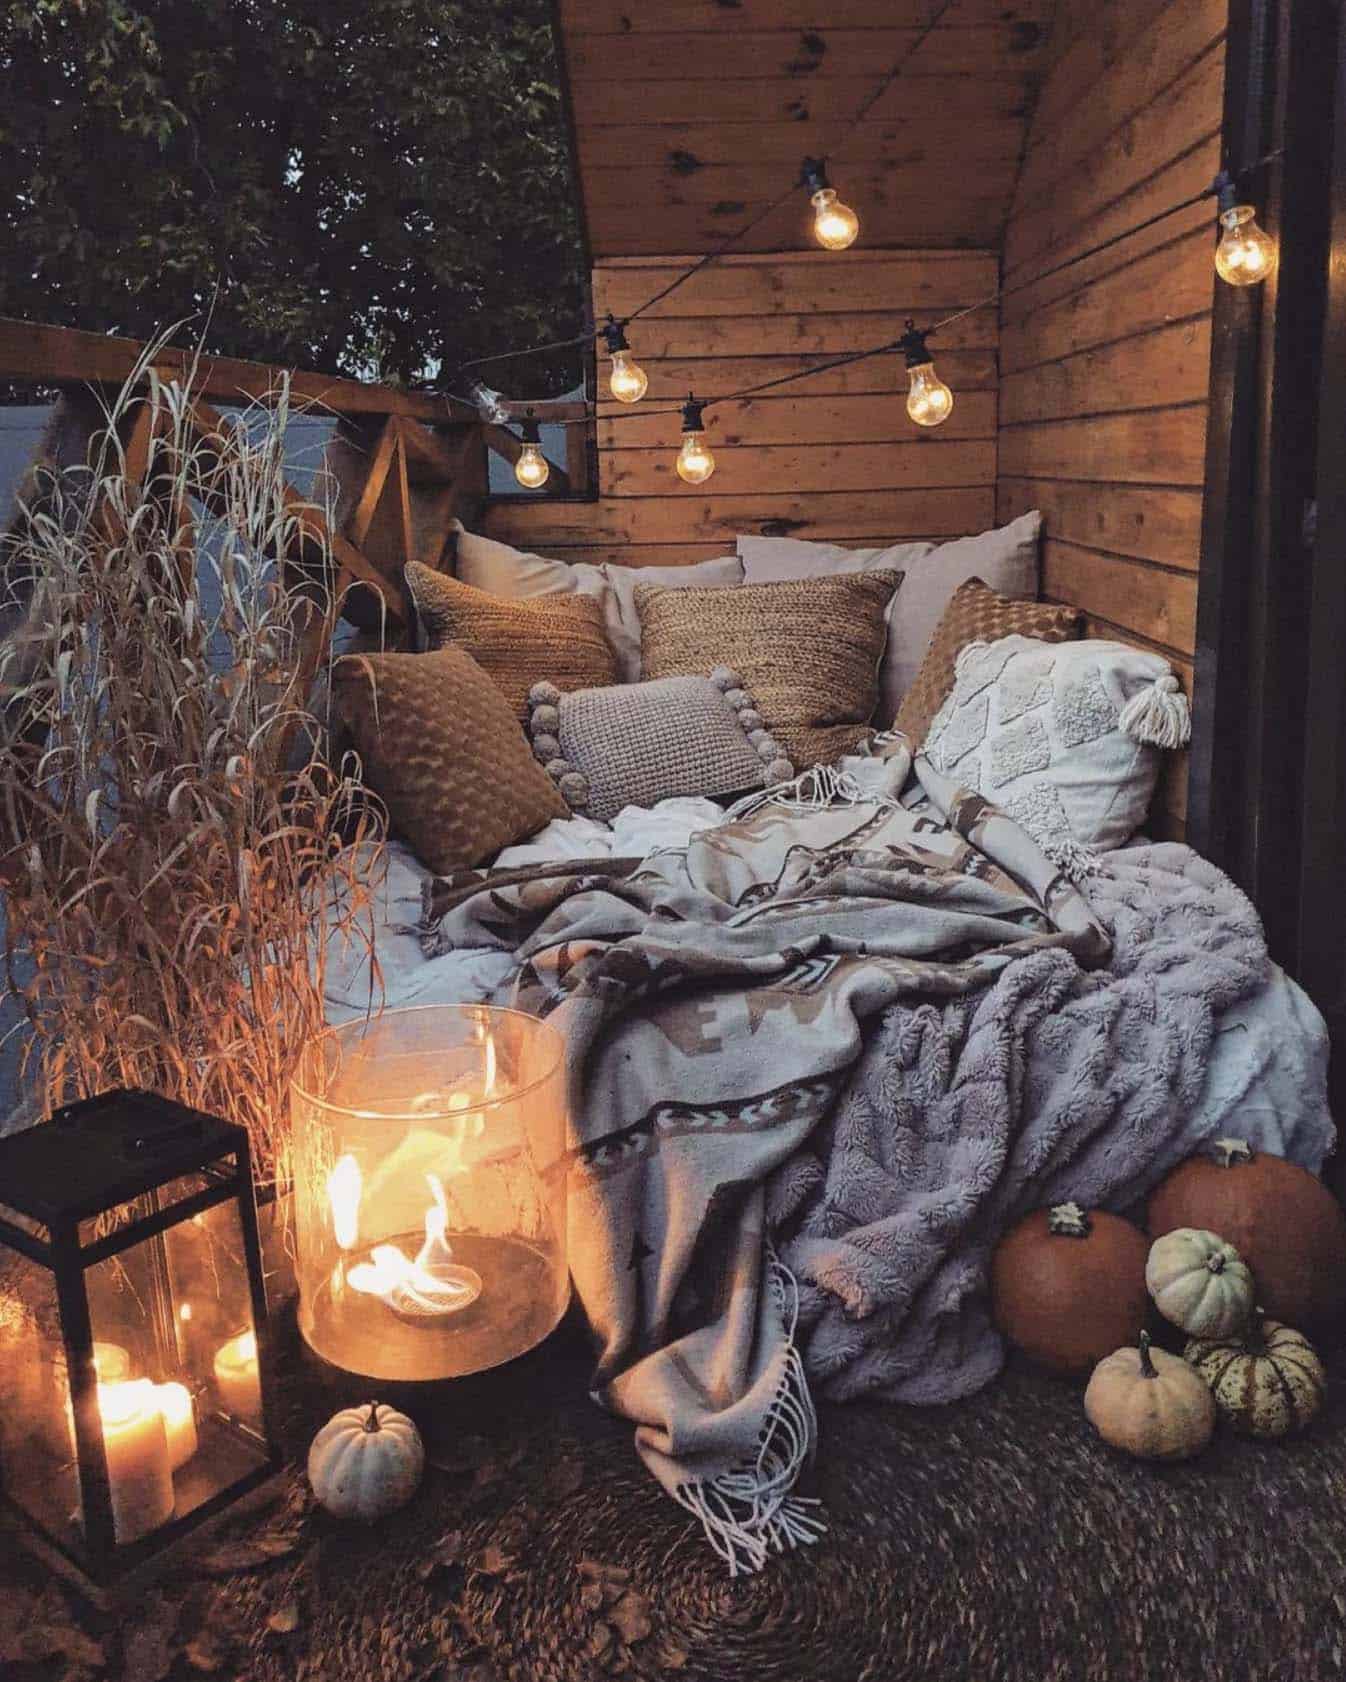 cozy outdoor bed on the balcony with string lights and pumpkins